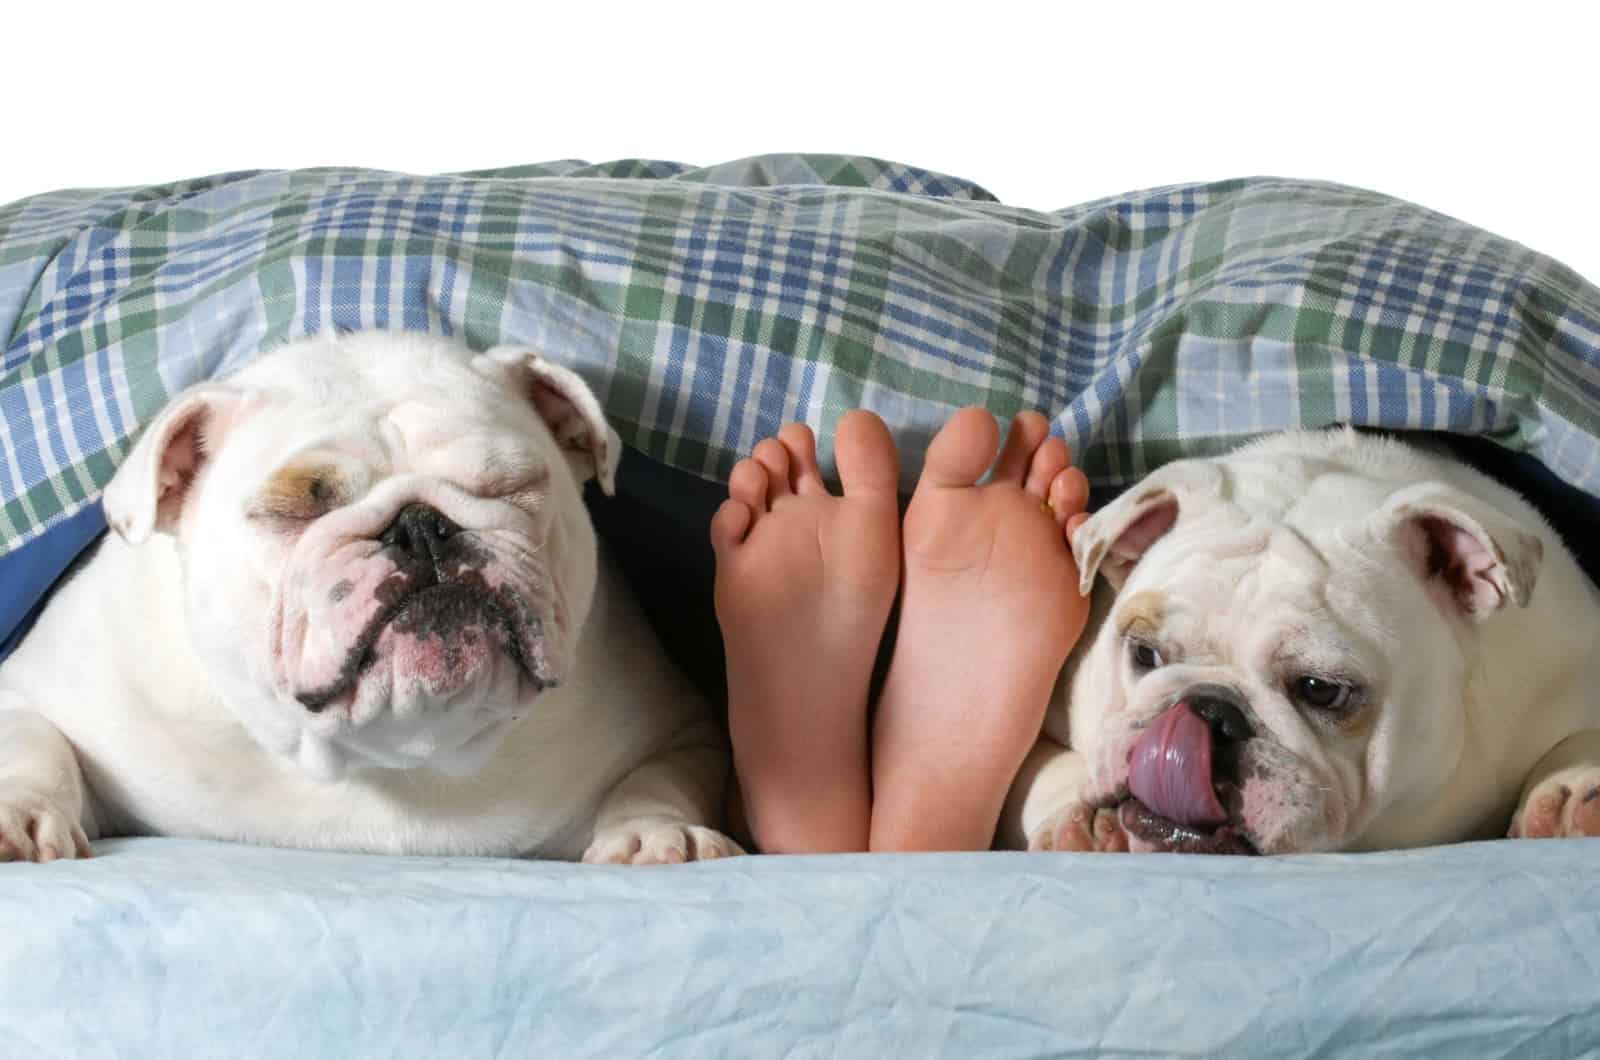 Dogs laying next to owner feets